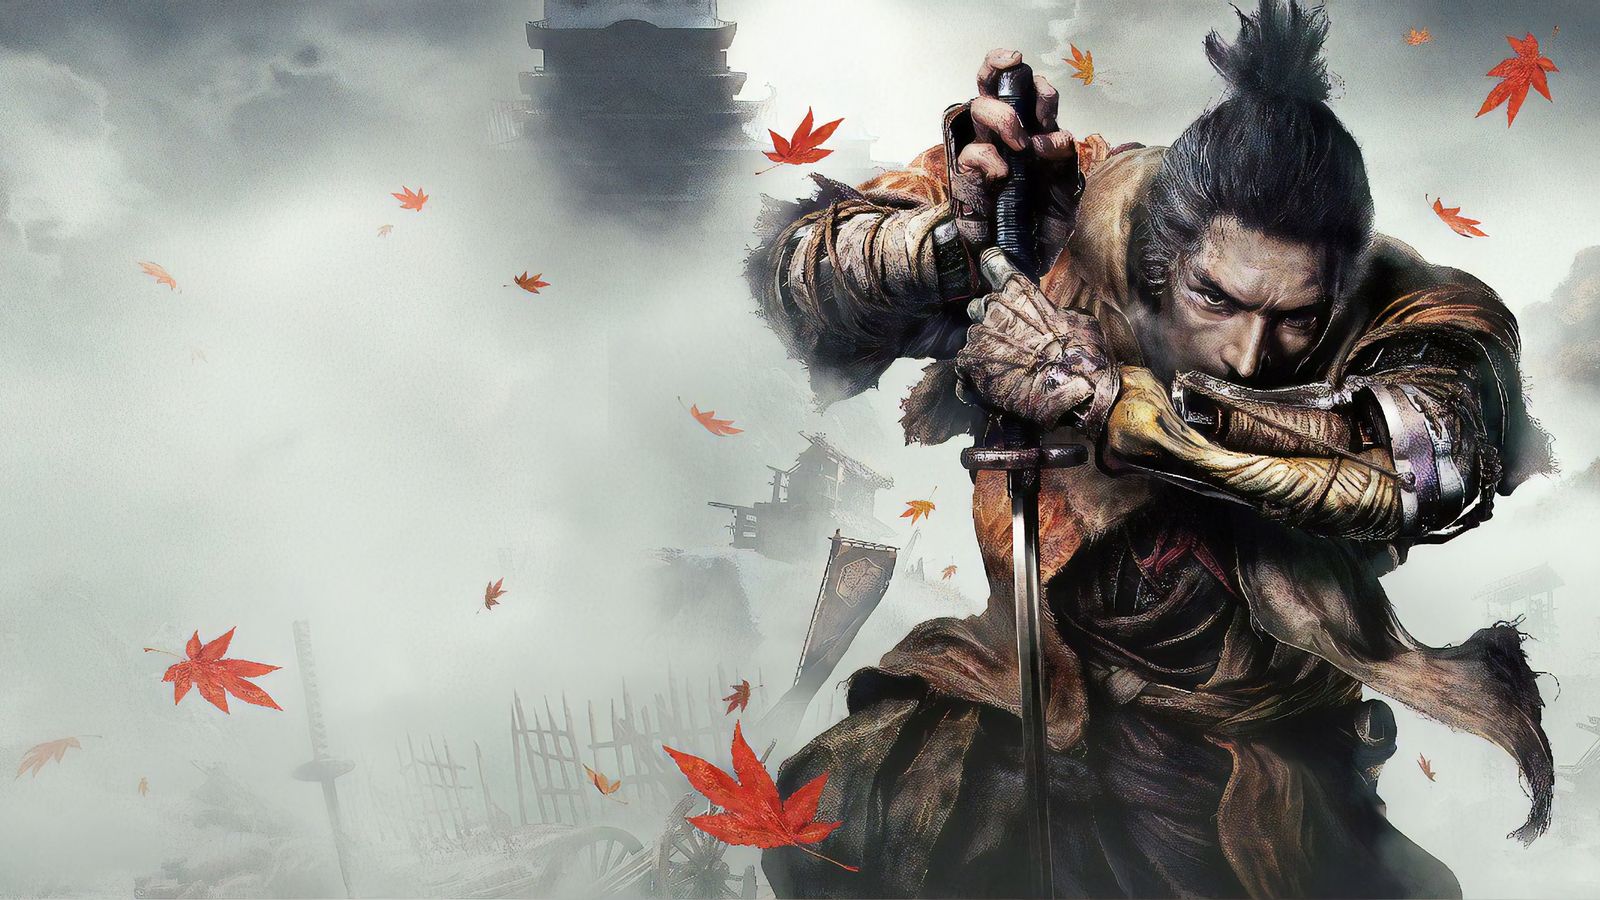 Sekiro: Shadows Die Twice - Game of the Year Edition для PS4